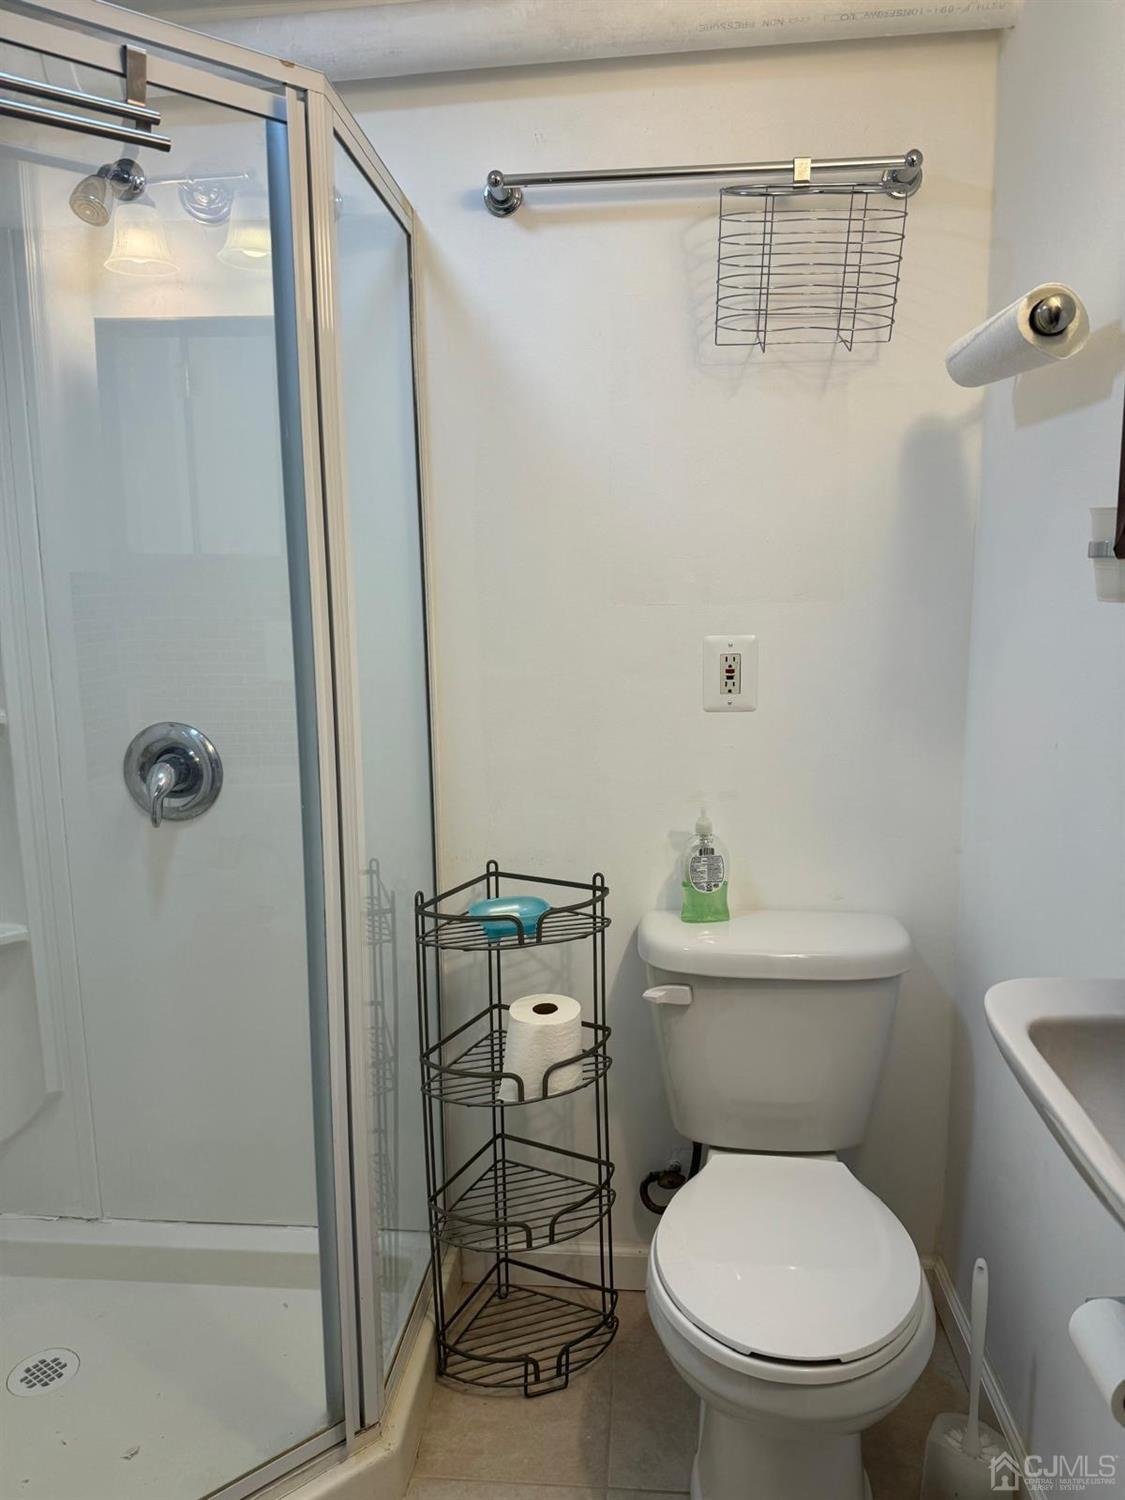 a white toilet sitting next to a shower